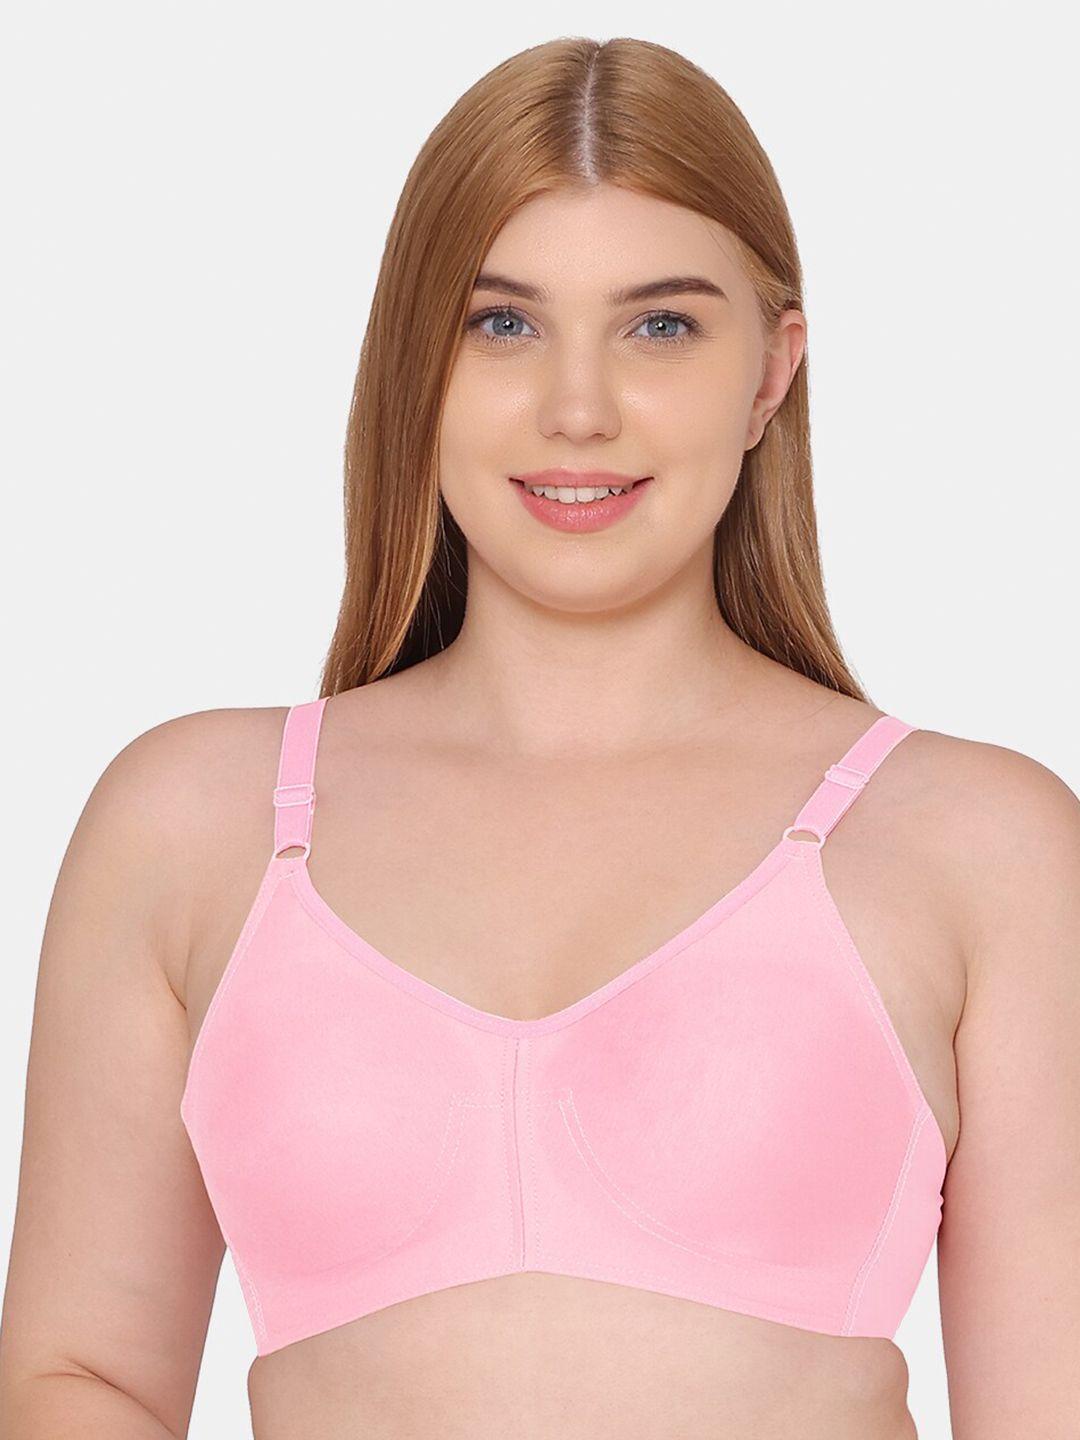 souminie full coverage all day comfort seamless cups cotton bra